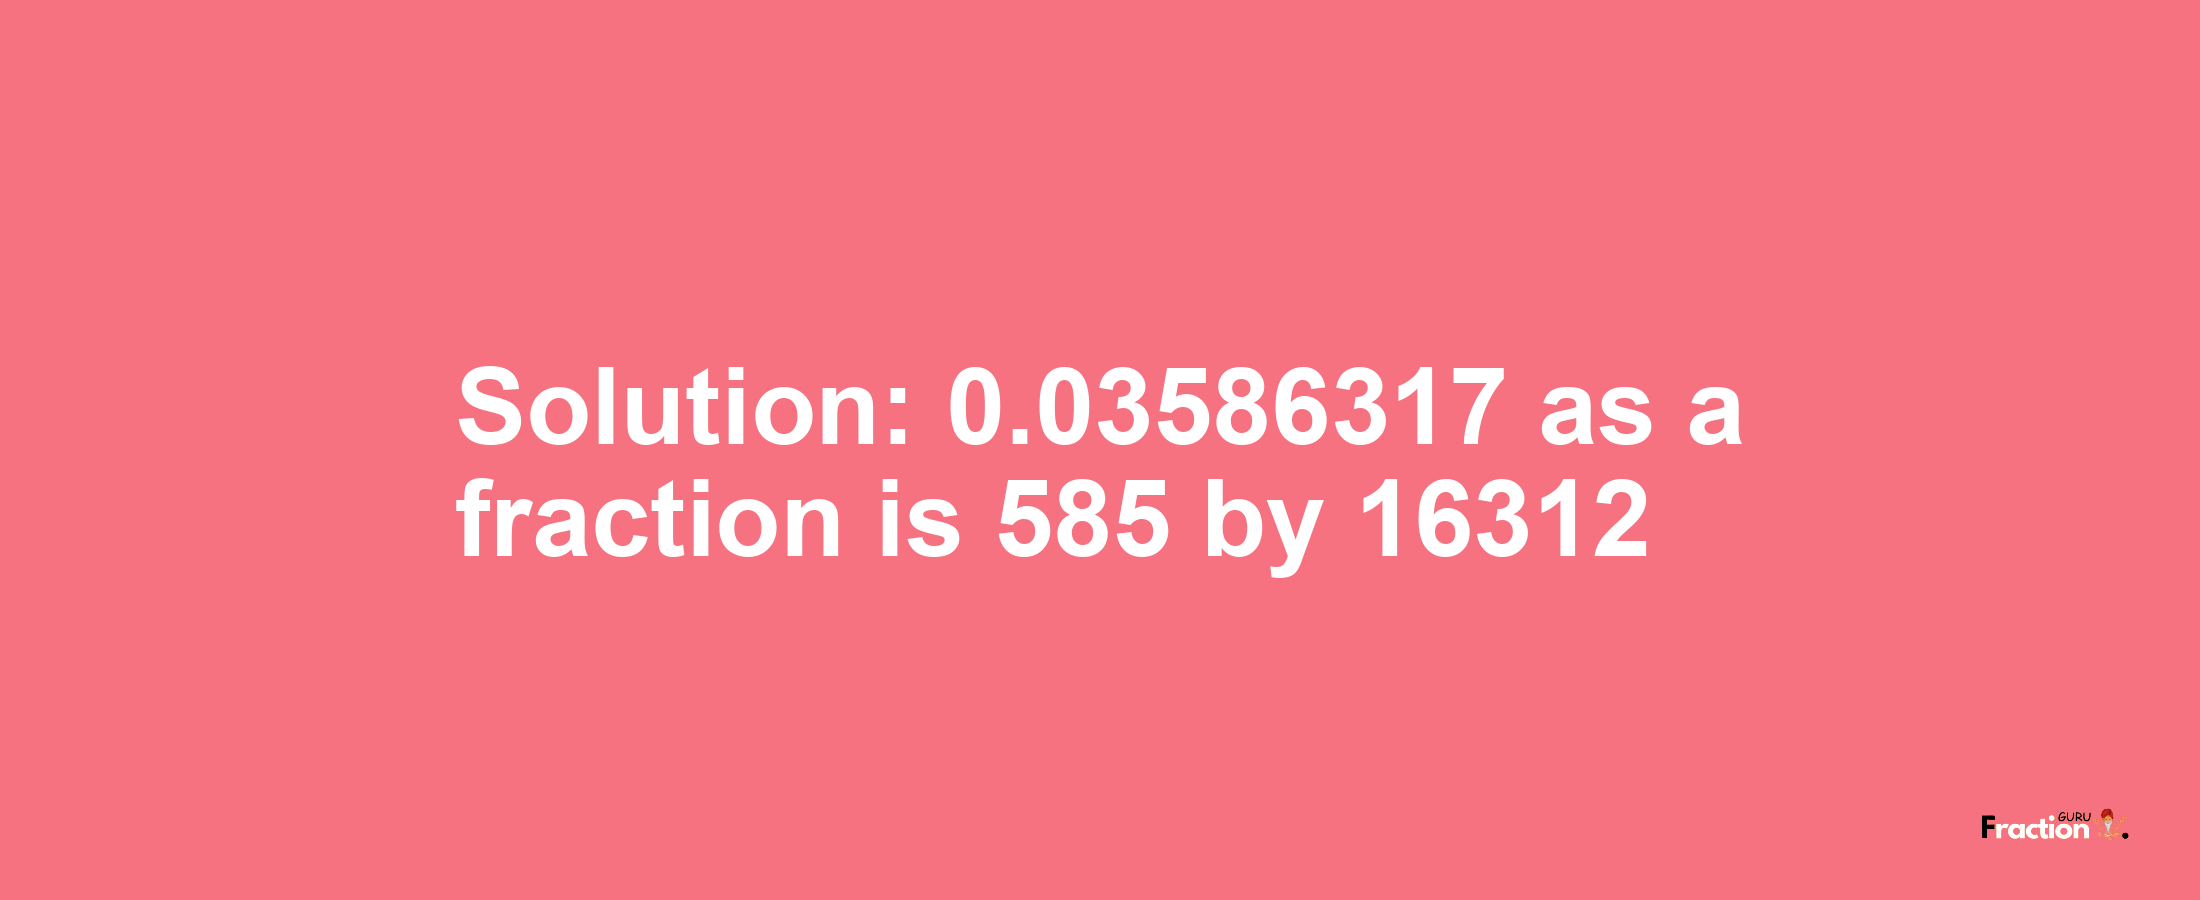 Solution:0.03586317 as a fraction is 585/16312